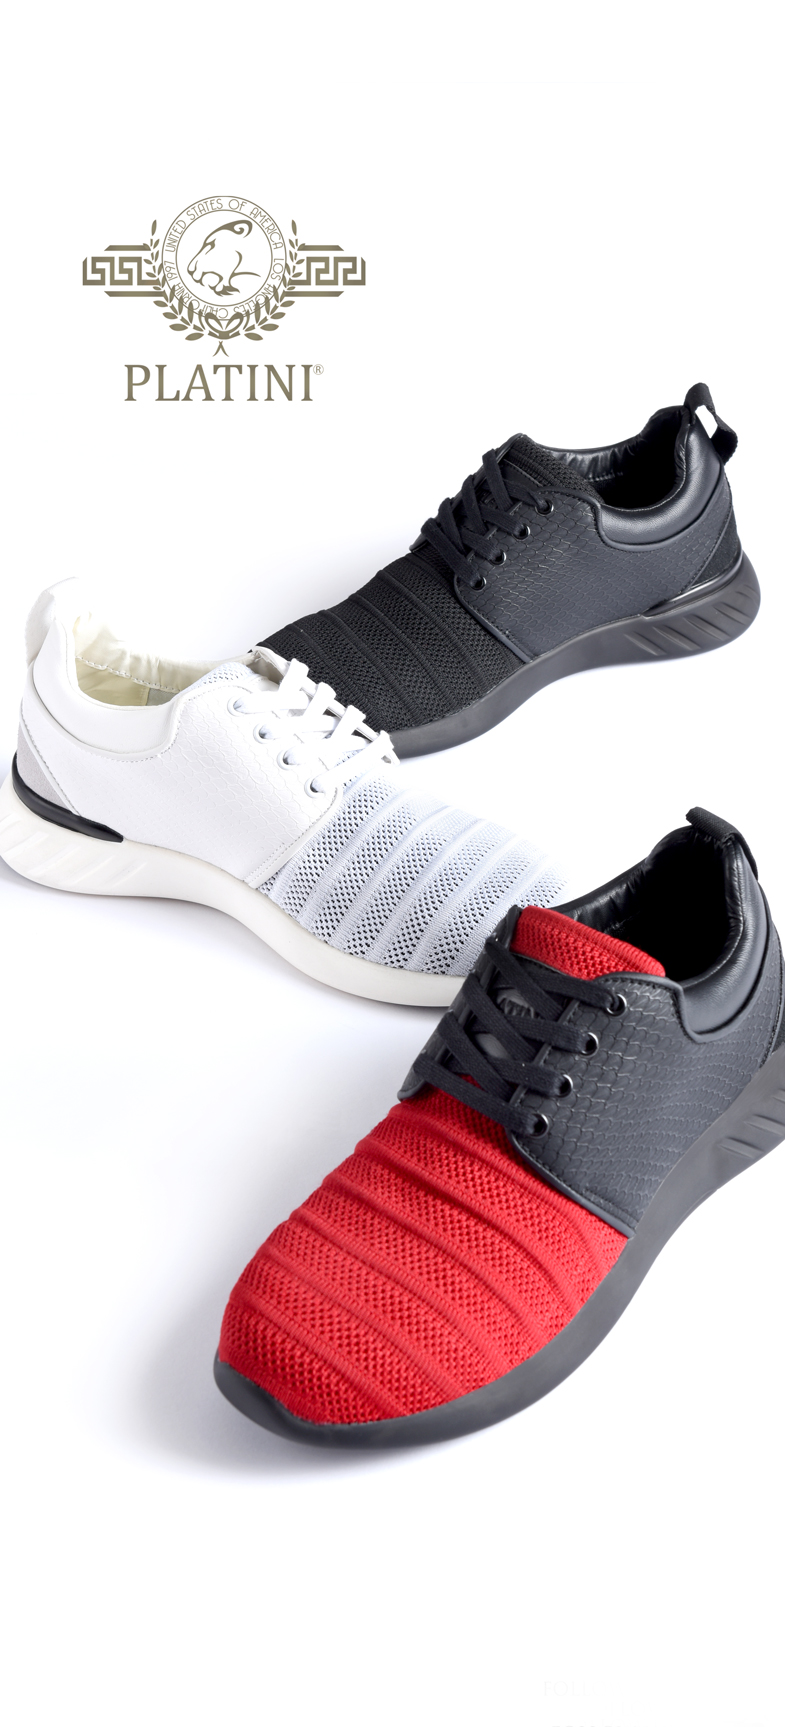 Shoes-Athletic-Banner.jpg